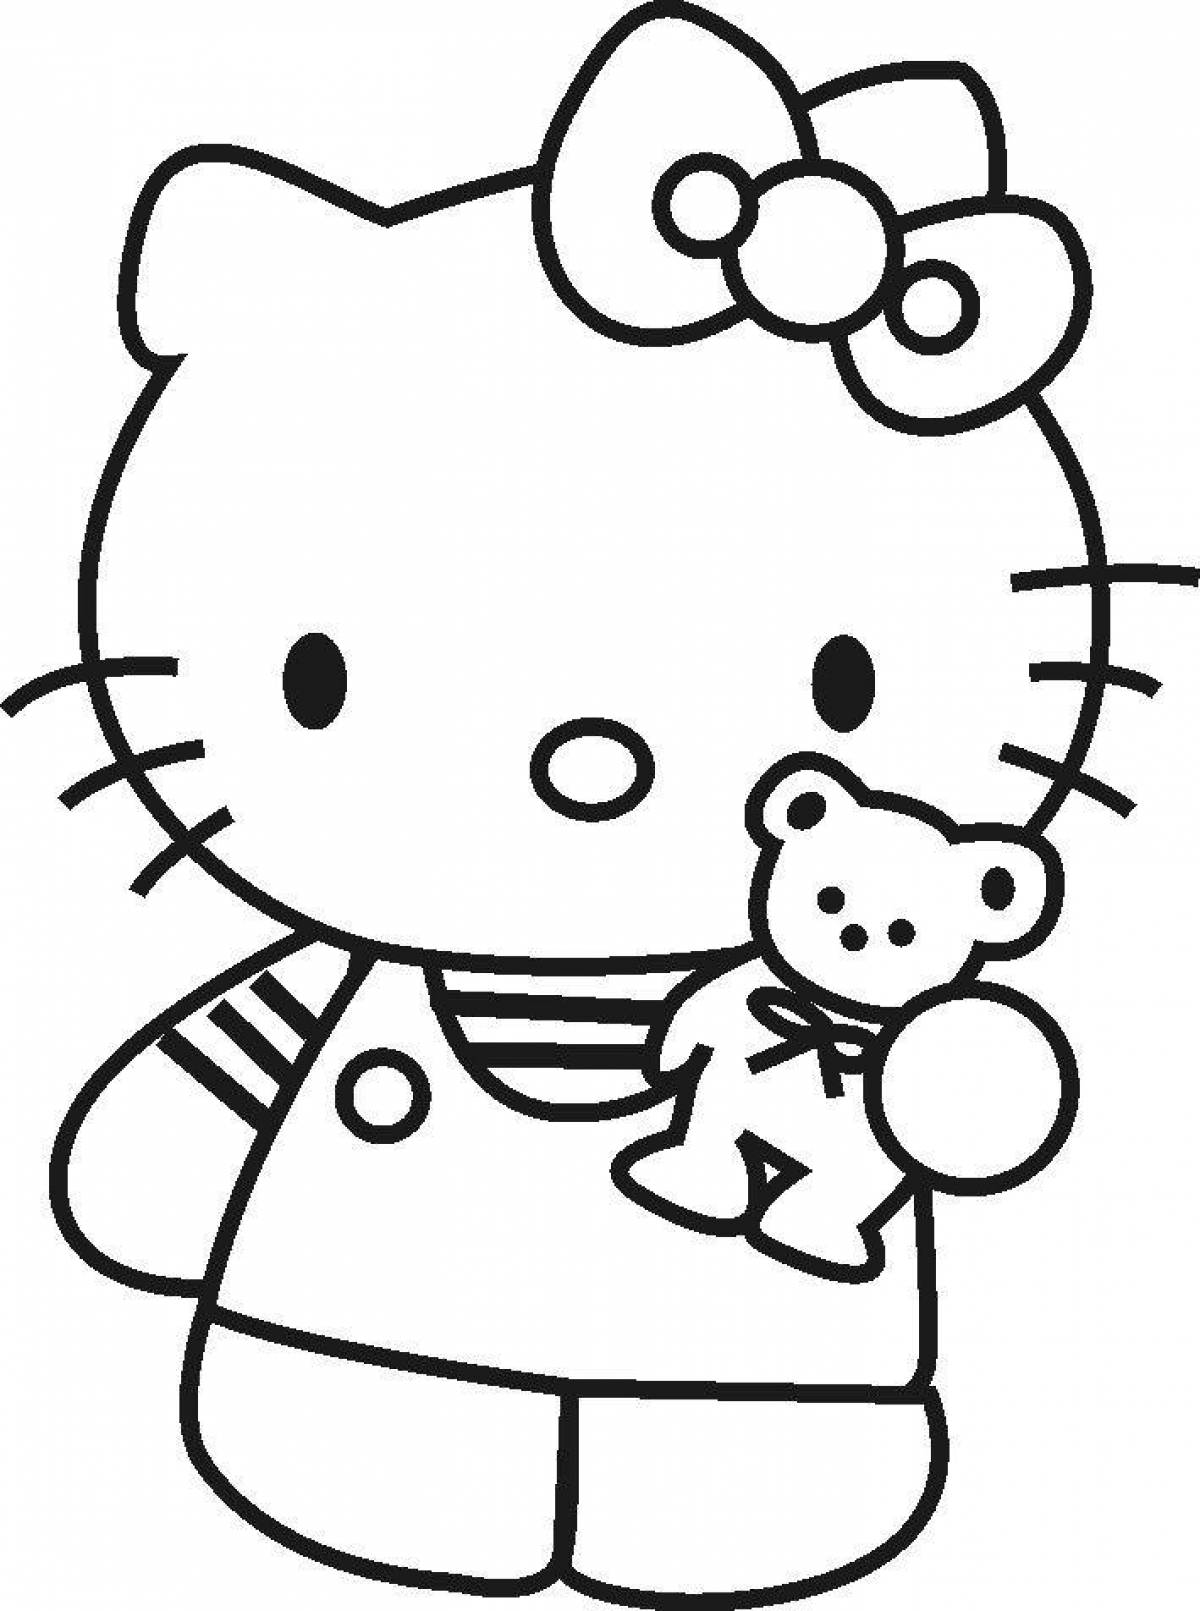 Adorable hallow kitty coloring page